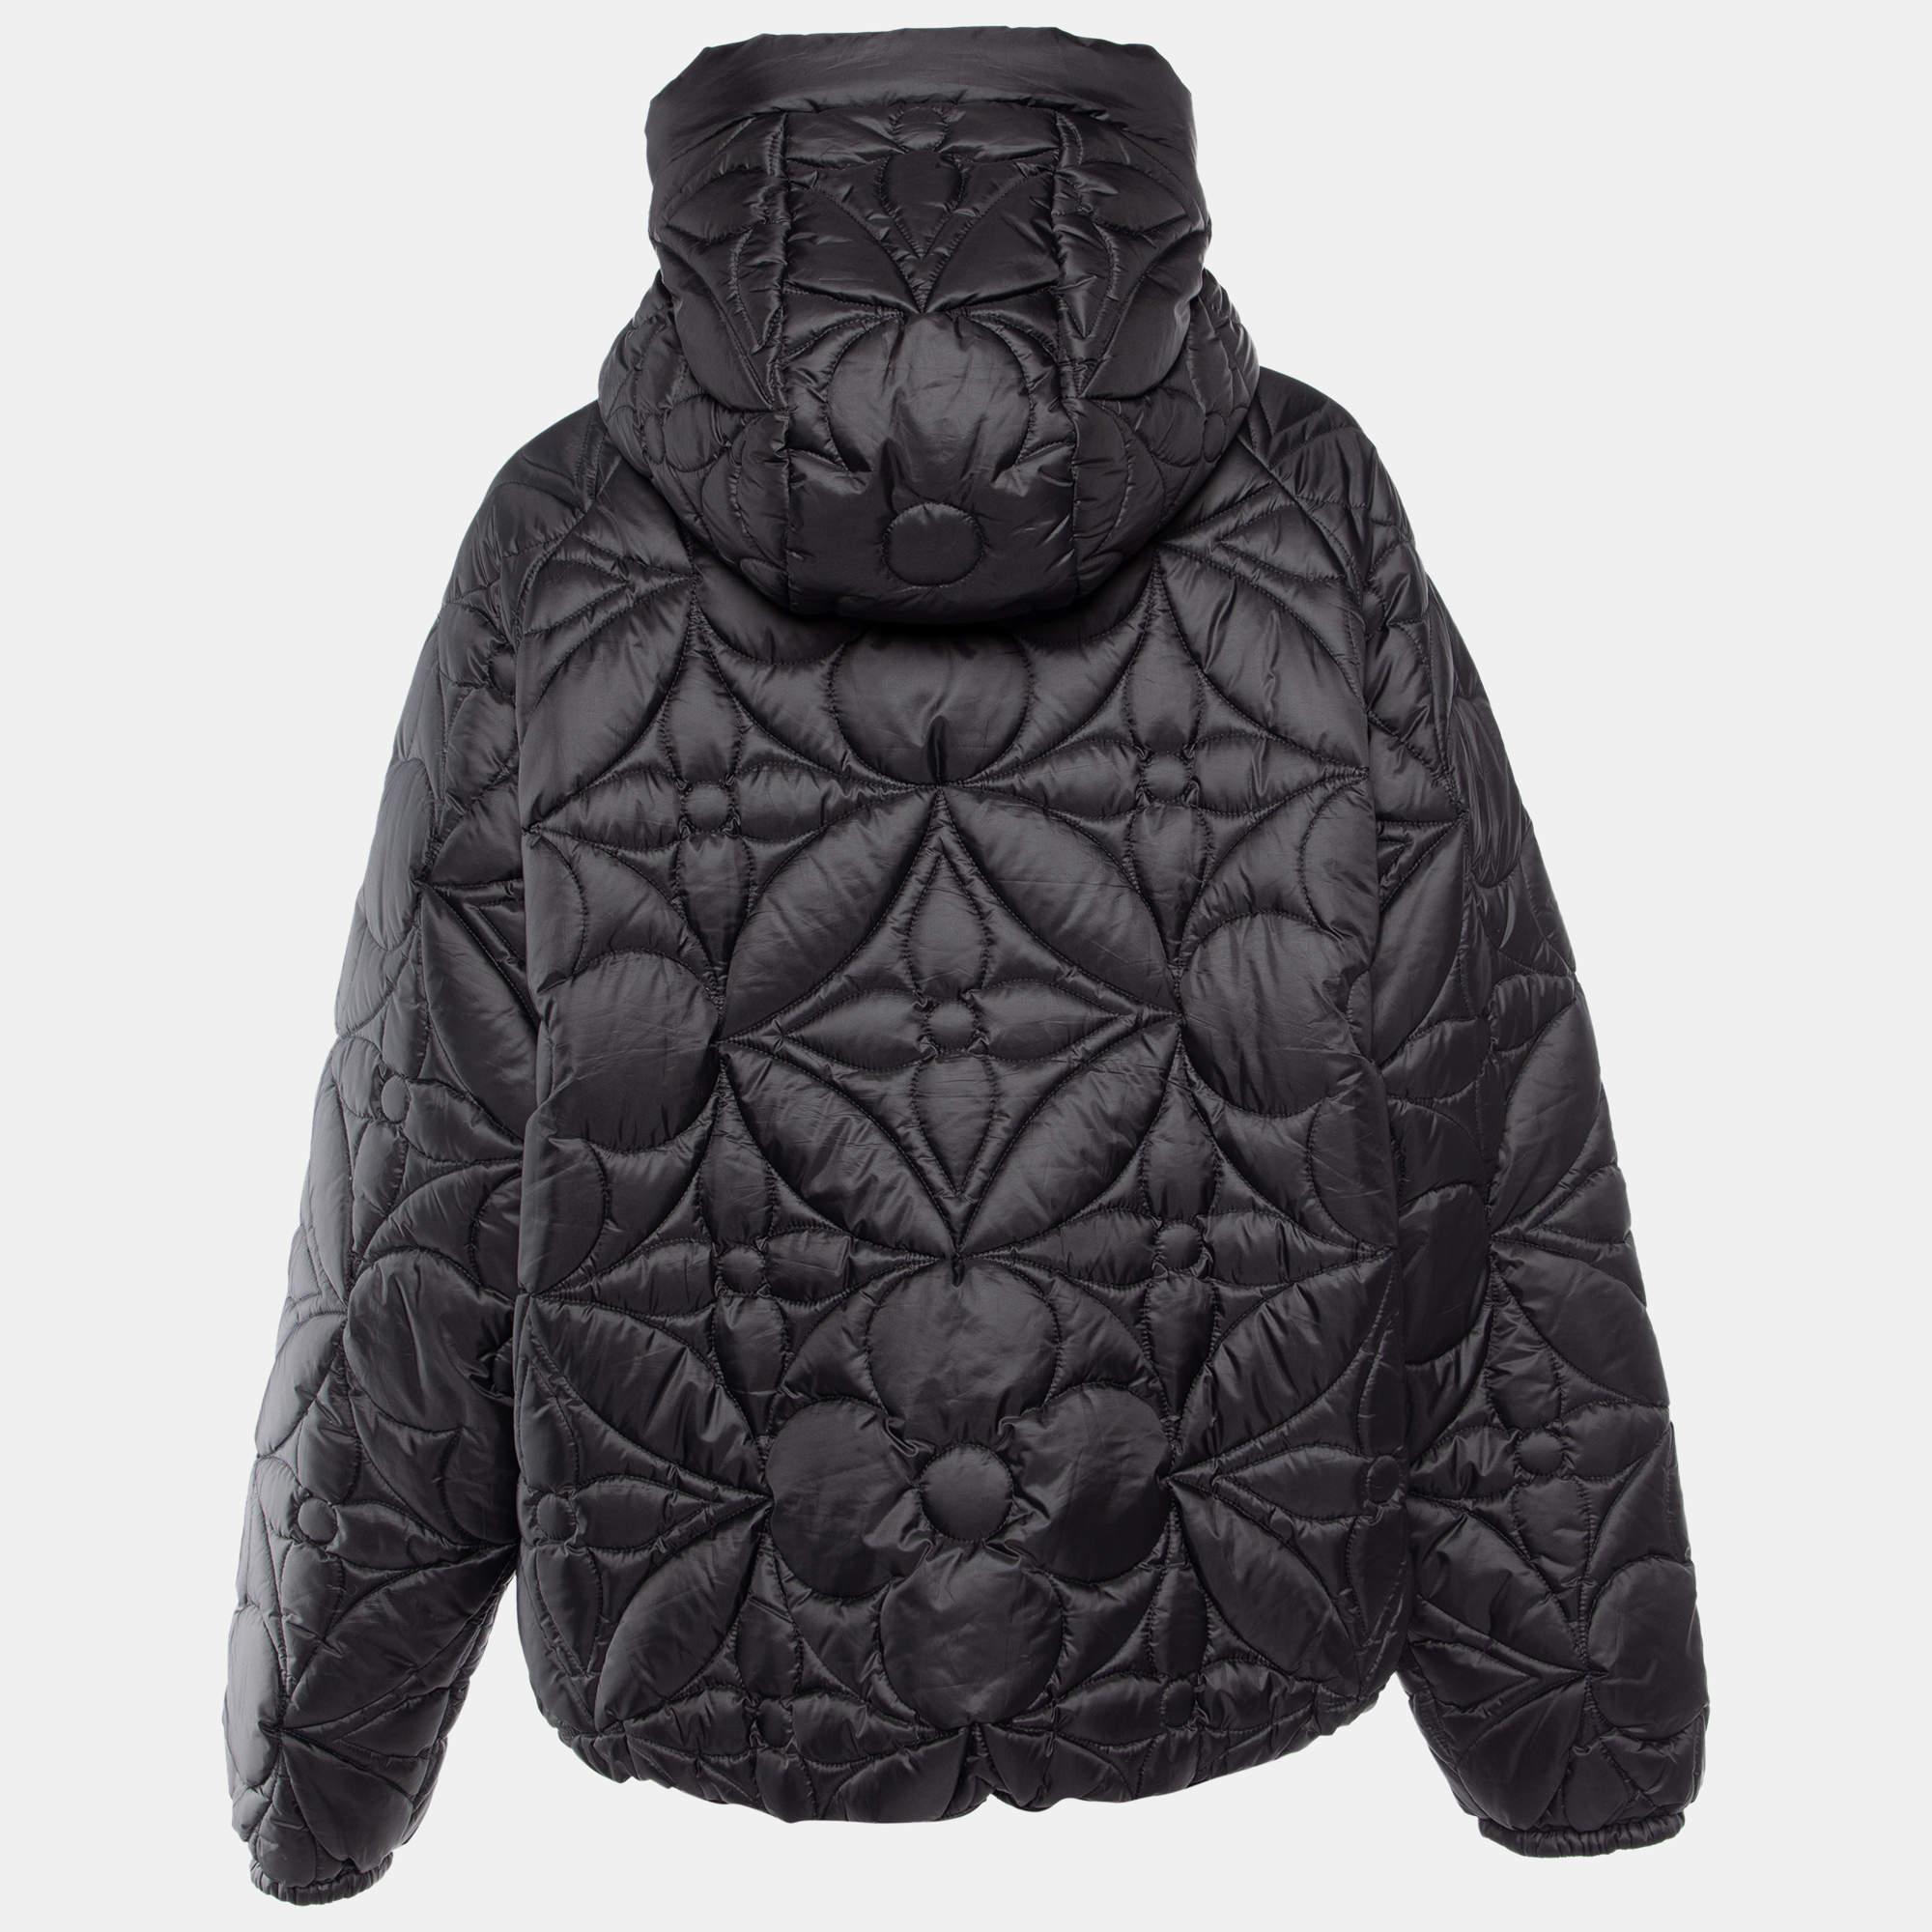 Experience luxury in every seam with this LV puffer jacket. Merging artistry and fashion, it's a piece that adds unmissable charm to your look, defining your unique style.

